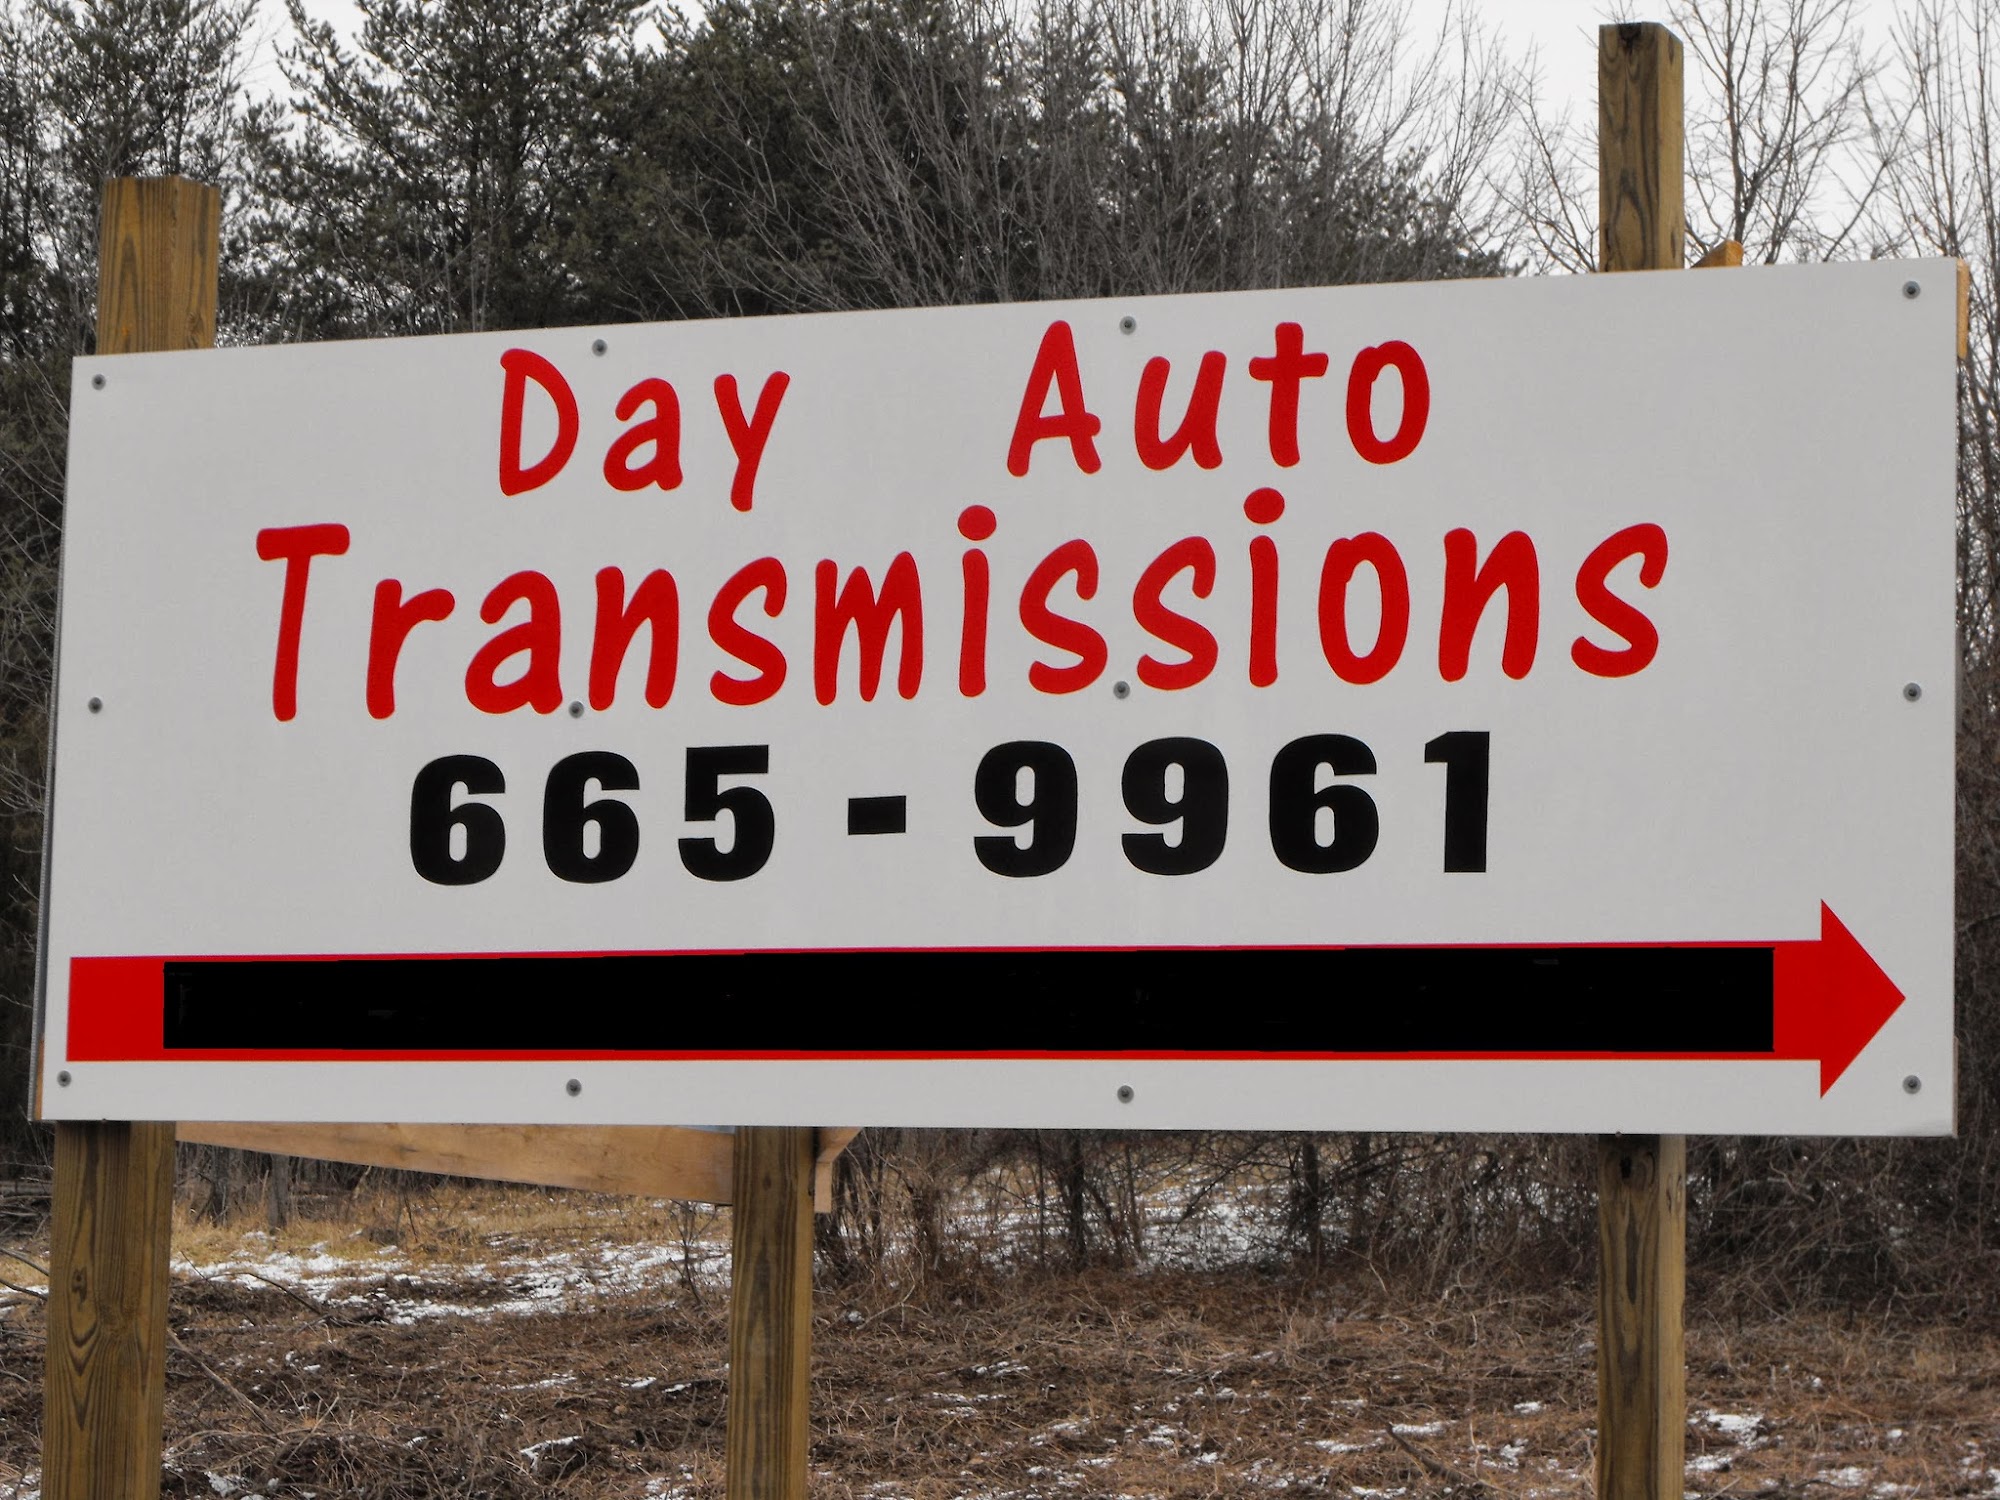 Day Auto Transmissions